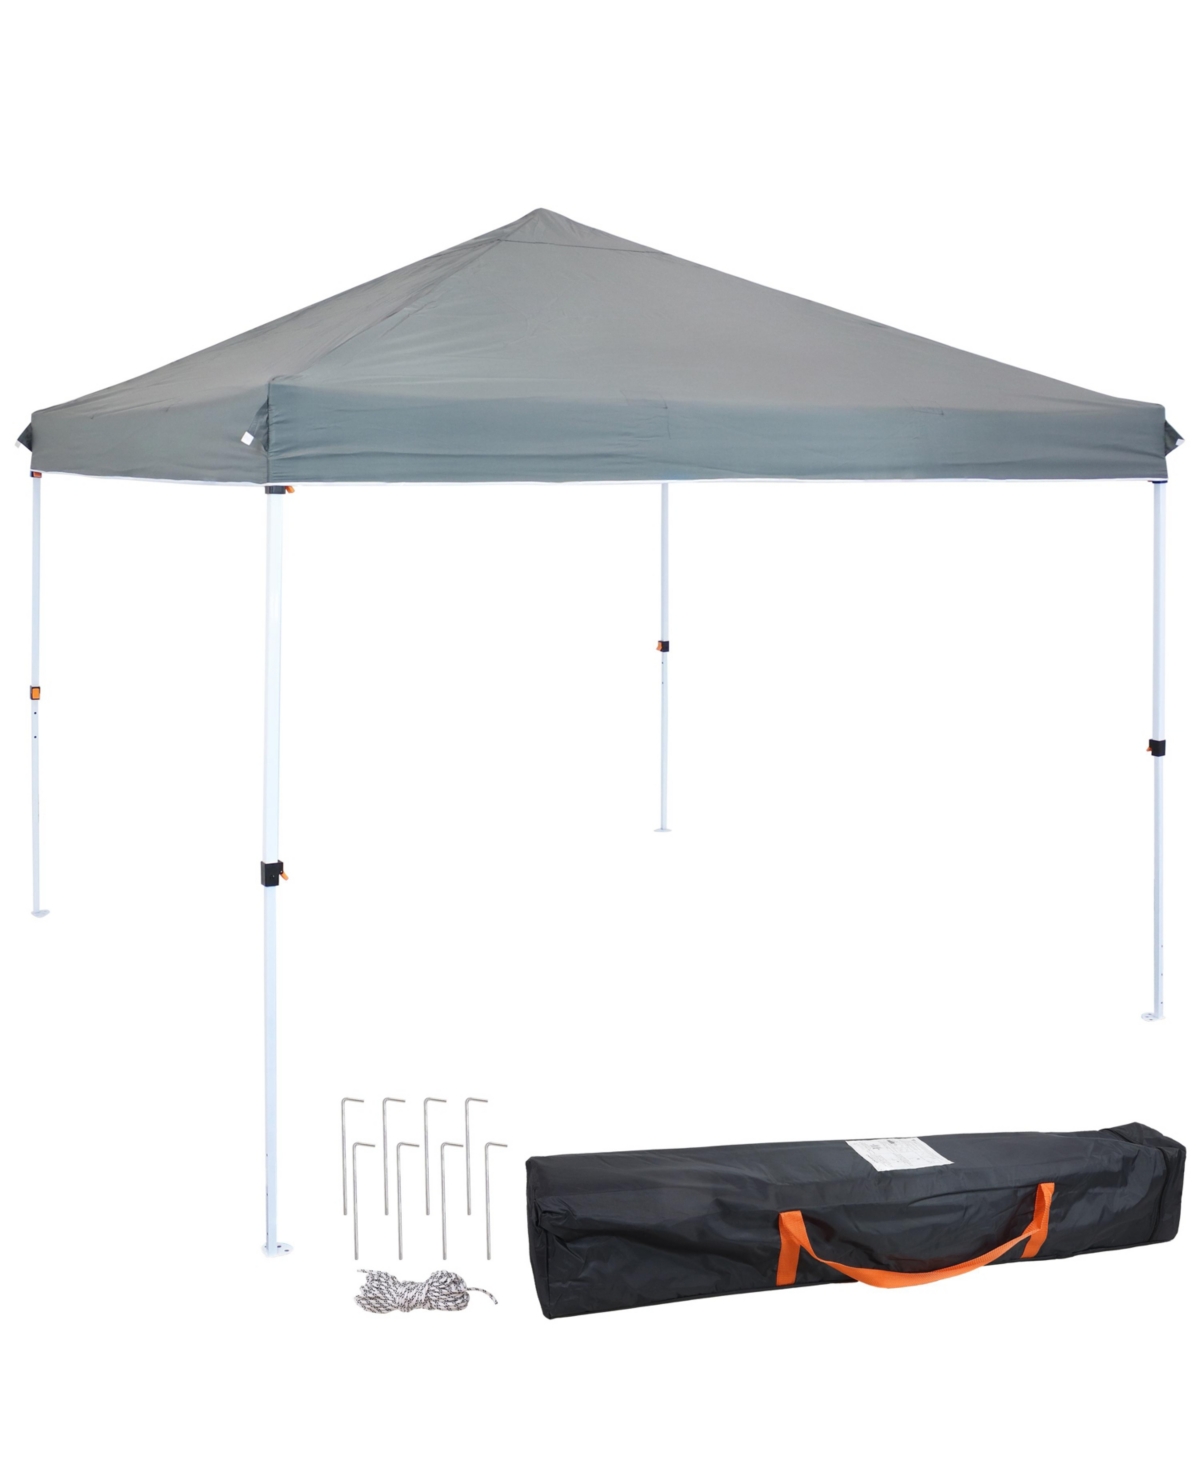 Standard Pop-Up Canopy with Carry Bag - 12 ft x 12 ft - Gray - Grey